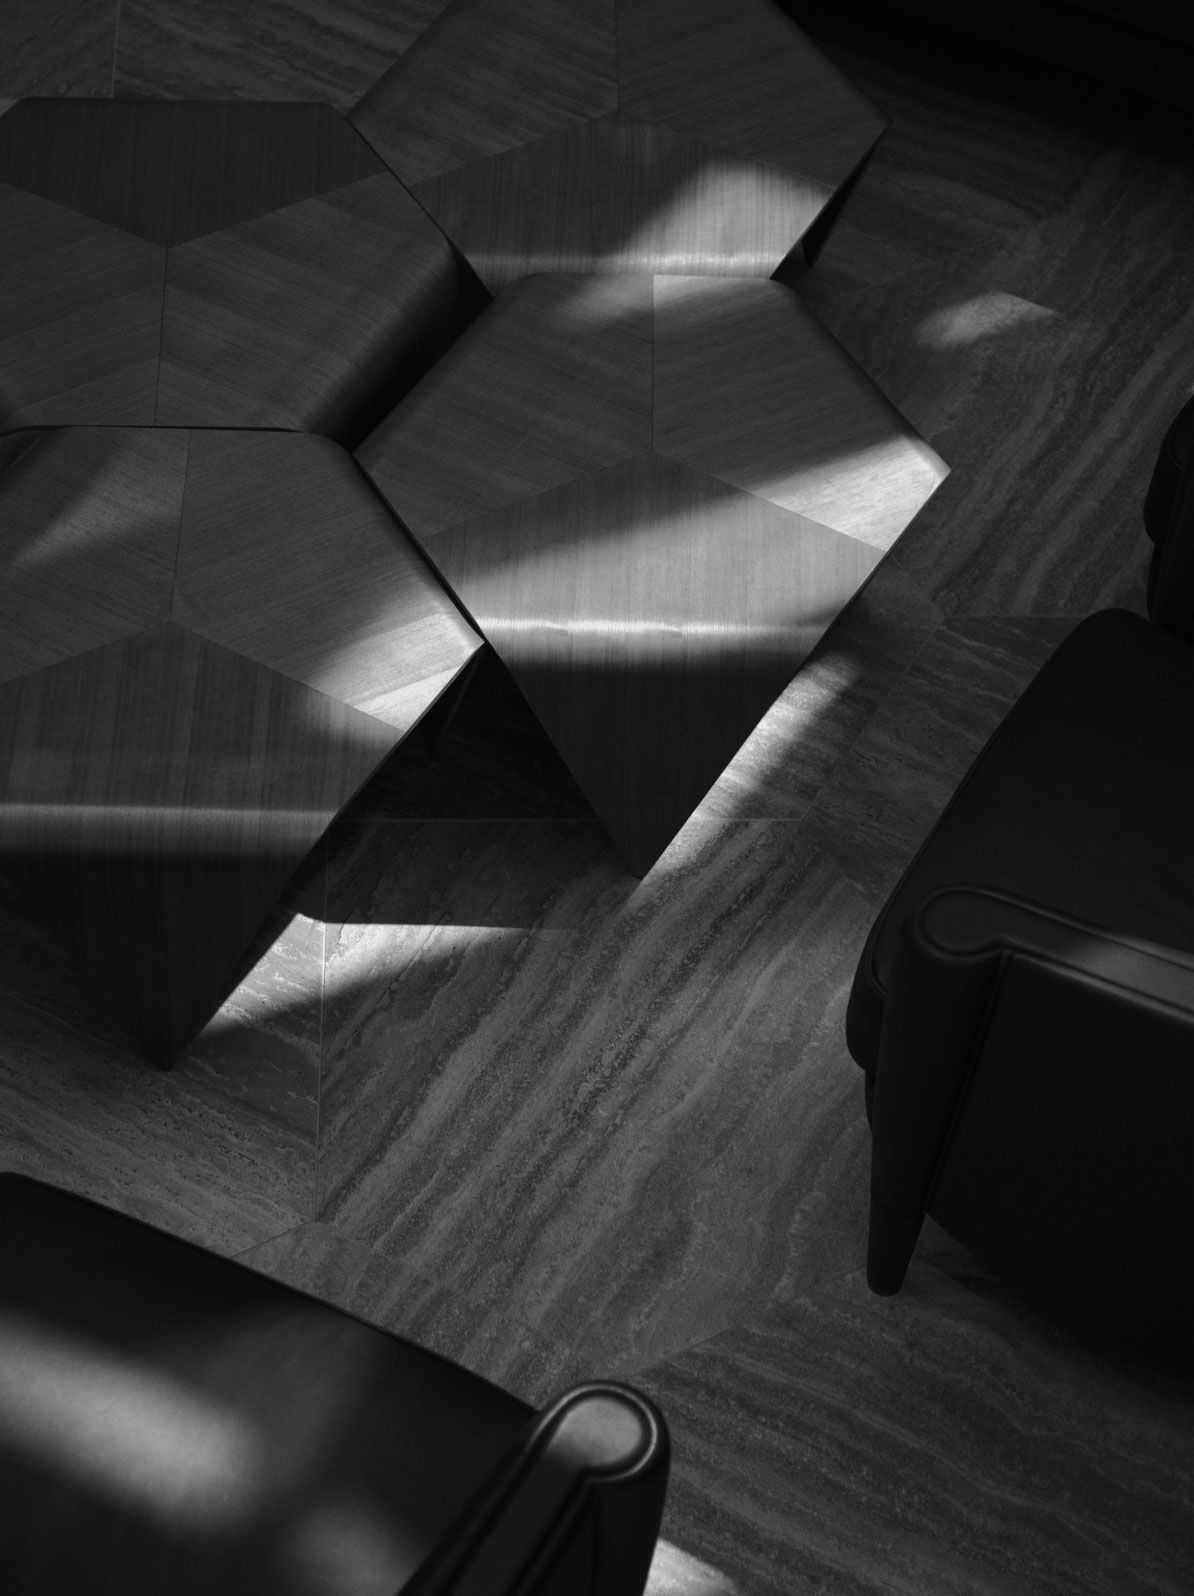 A monochrome image highlighting the interplay of light and shadow on a geometrically patterned floor with elegant furniture